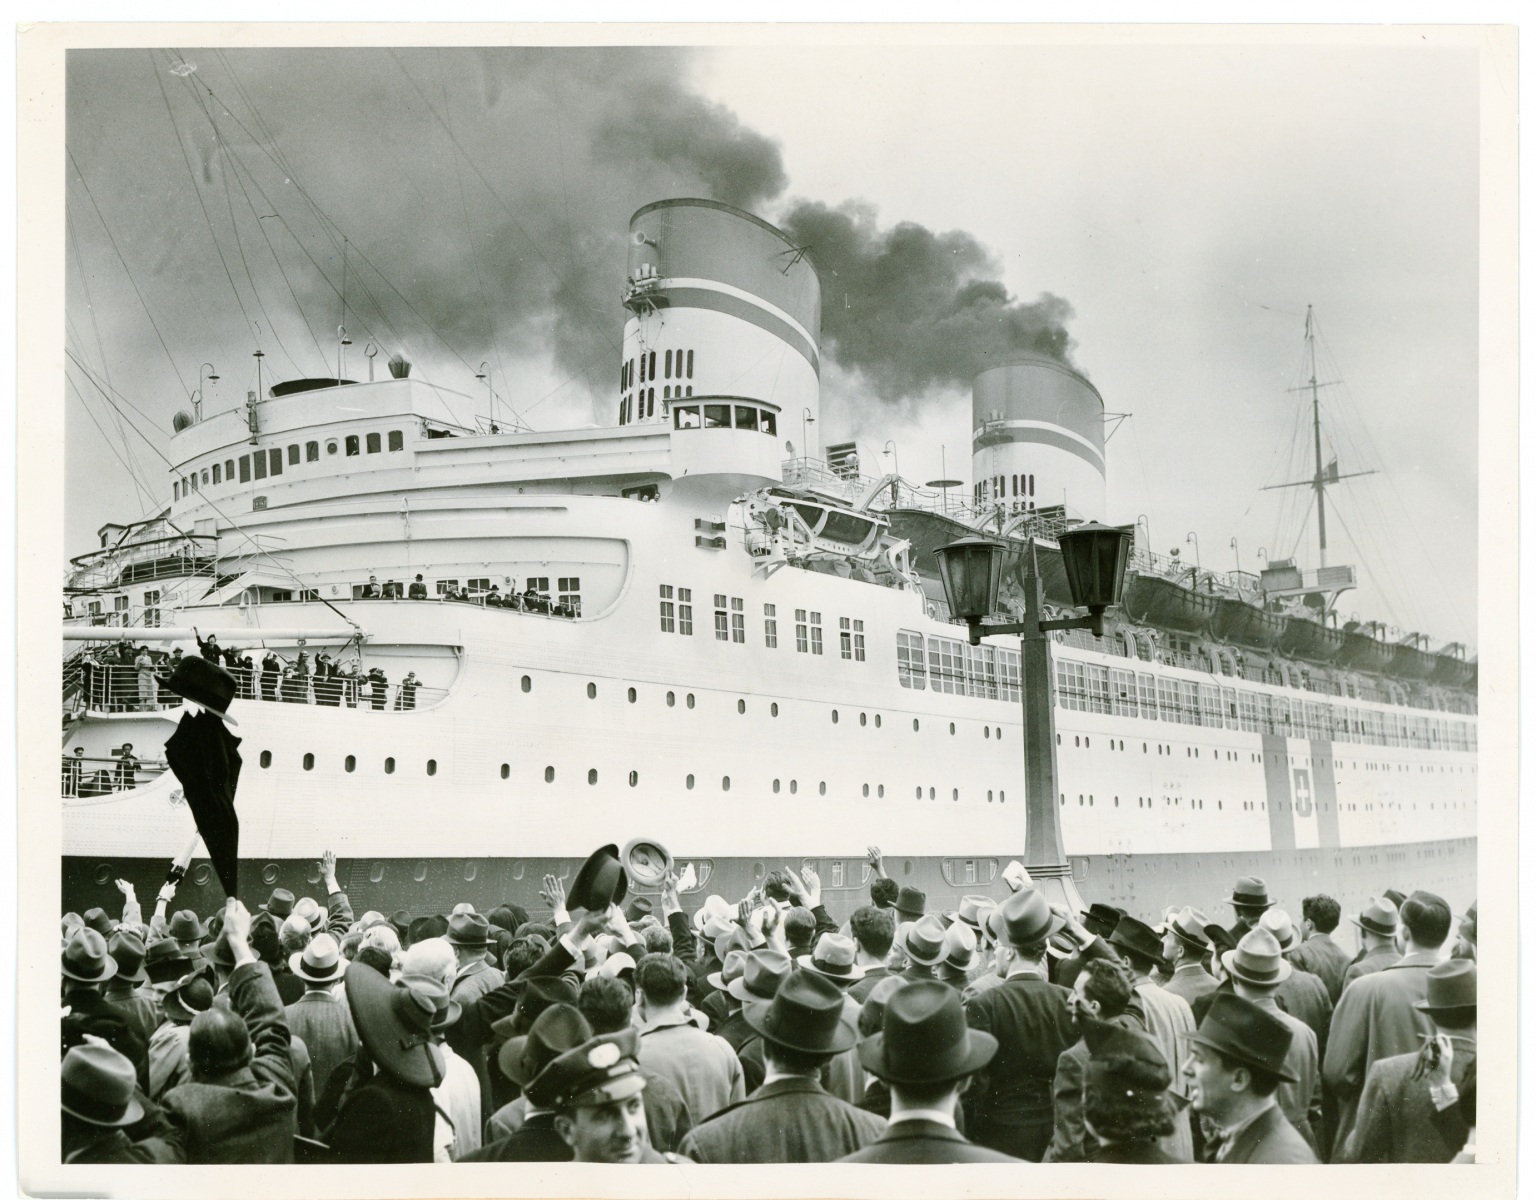 Italian Liner Sails with 160 Passengers, May 25, 1940